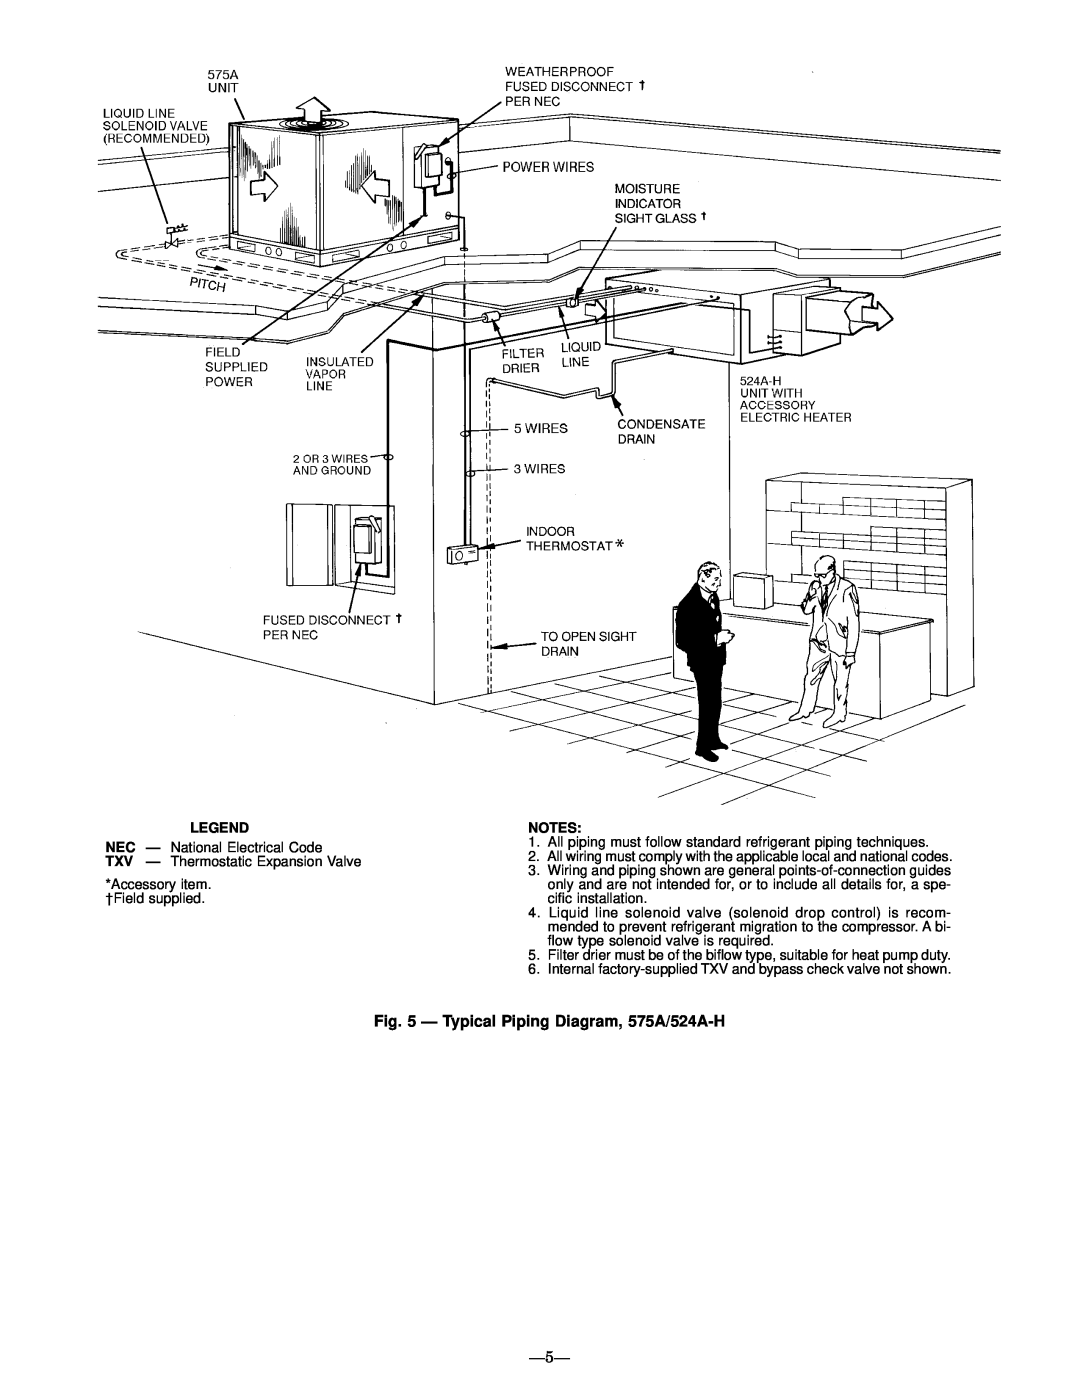 Bryant installation instructions Ð Typical Piping Diagram, 575A/524A-H 